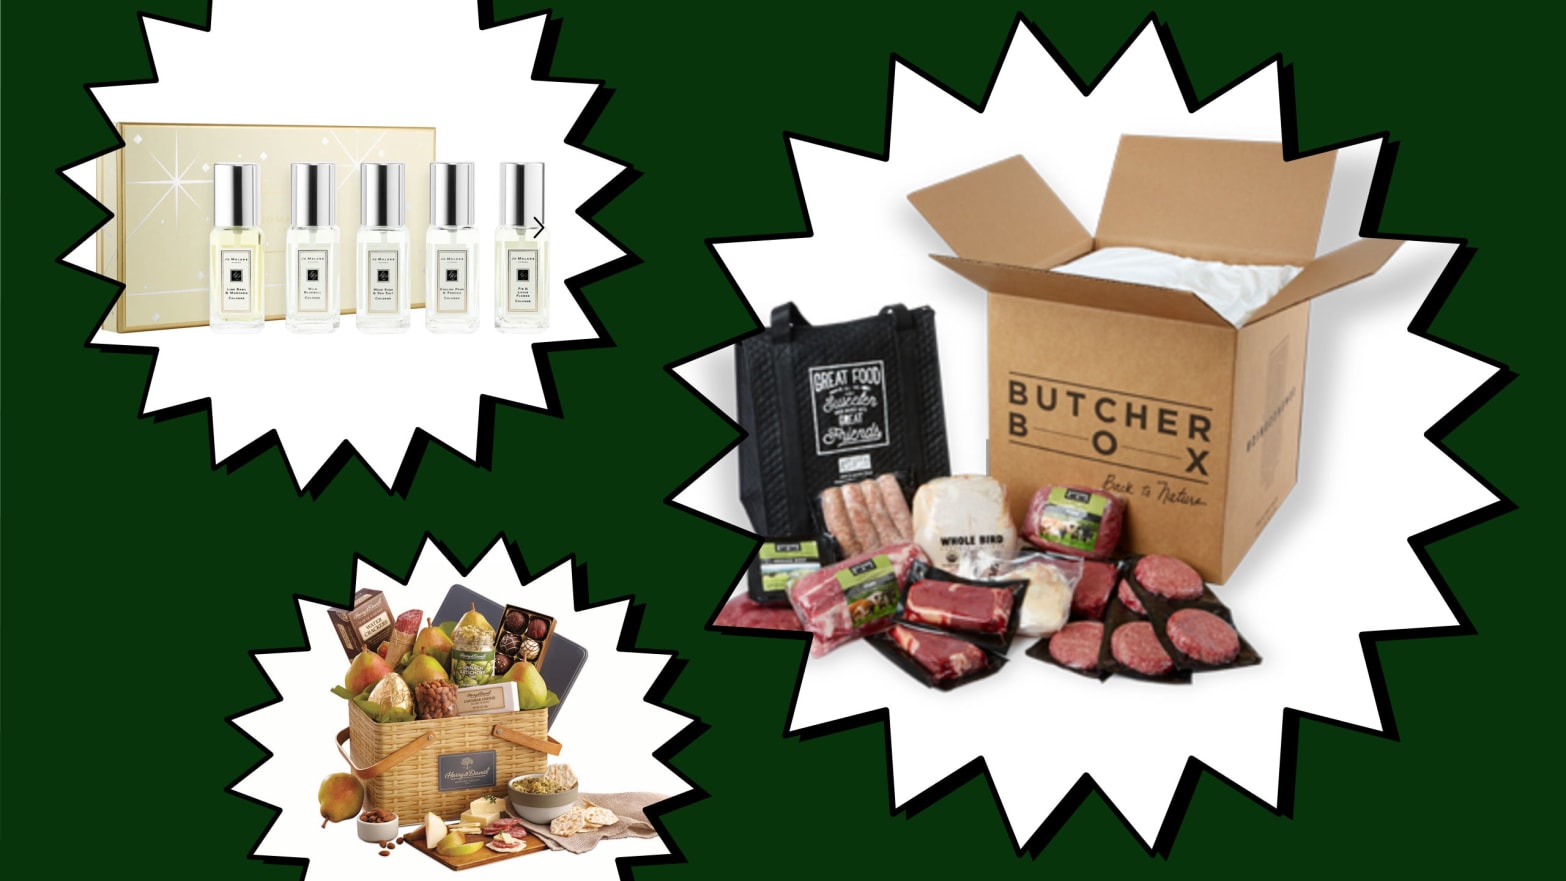 Best Christmas Gift Baskets To Give To Your Loved Ones This Christmas!